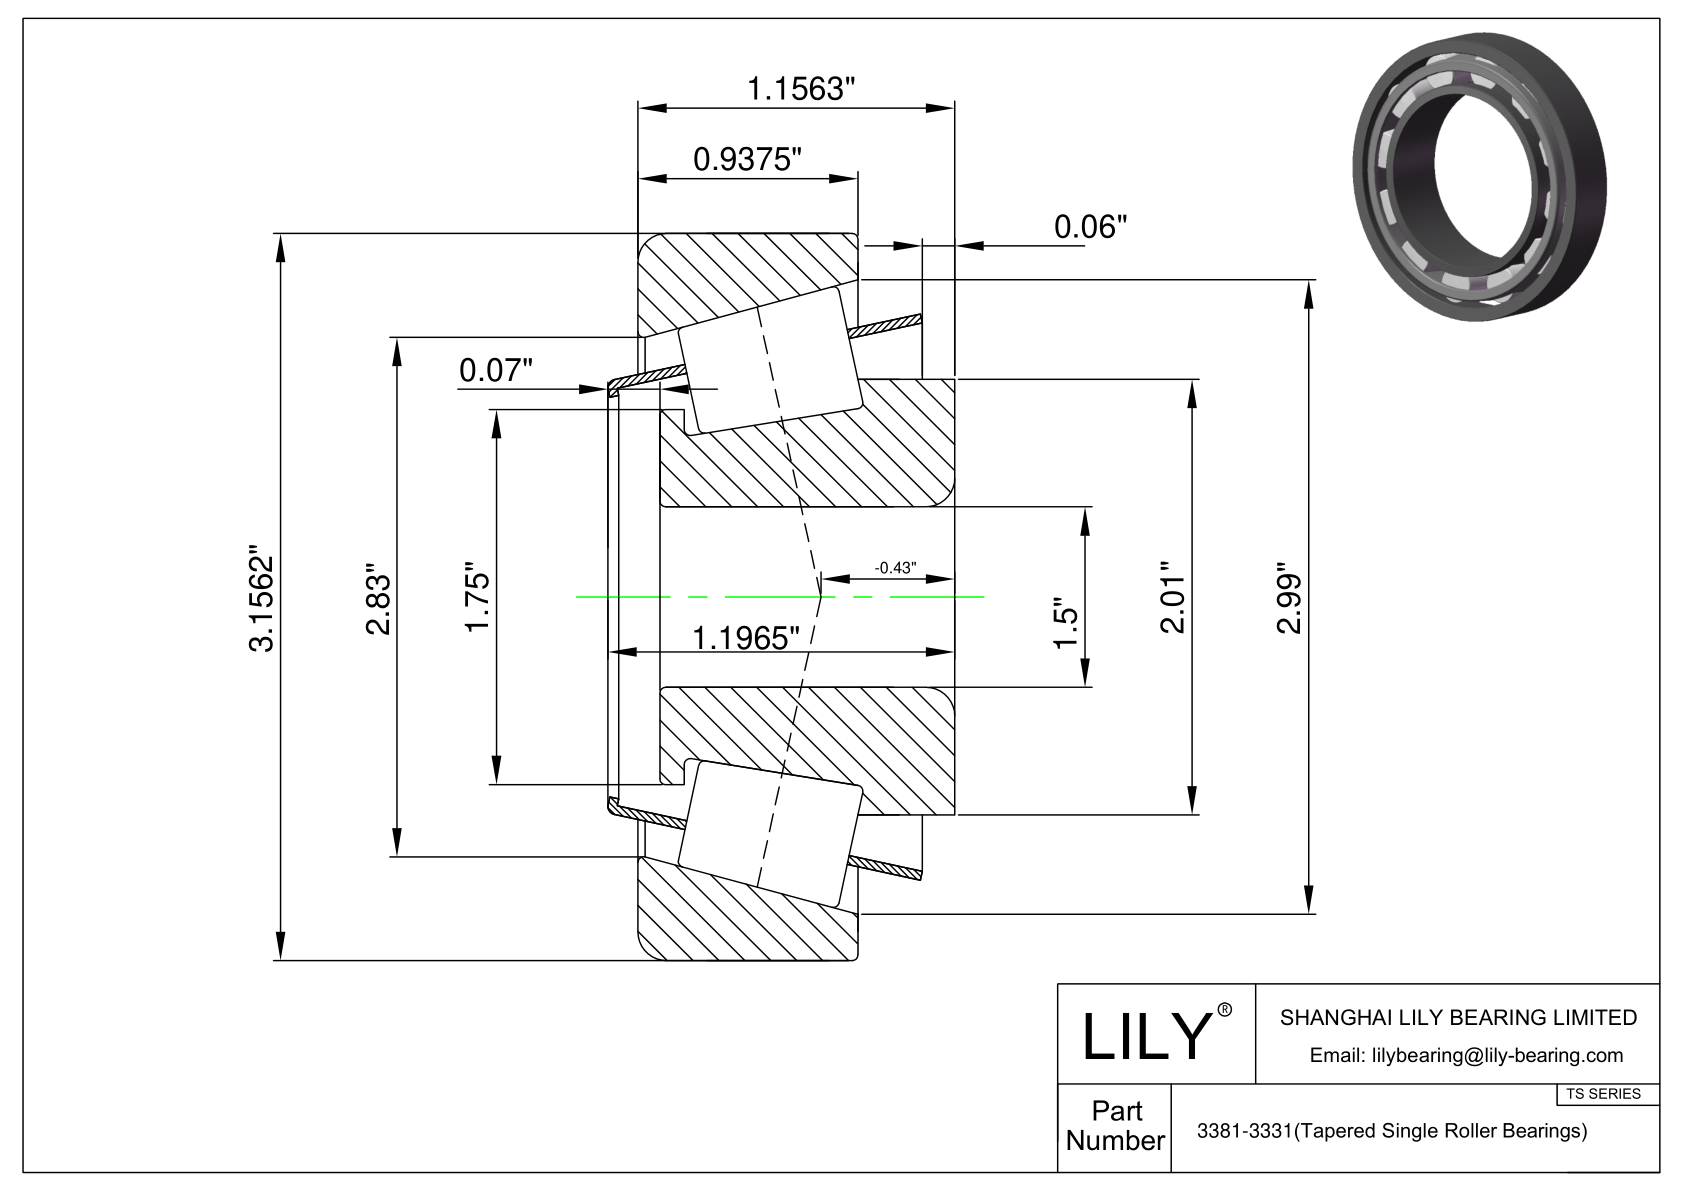 3381-3331 TS (Tapered Single Roller Bearings) (Imperial) cad drawing